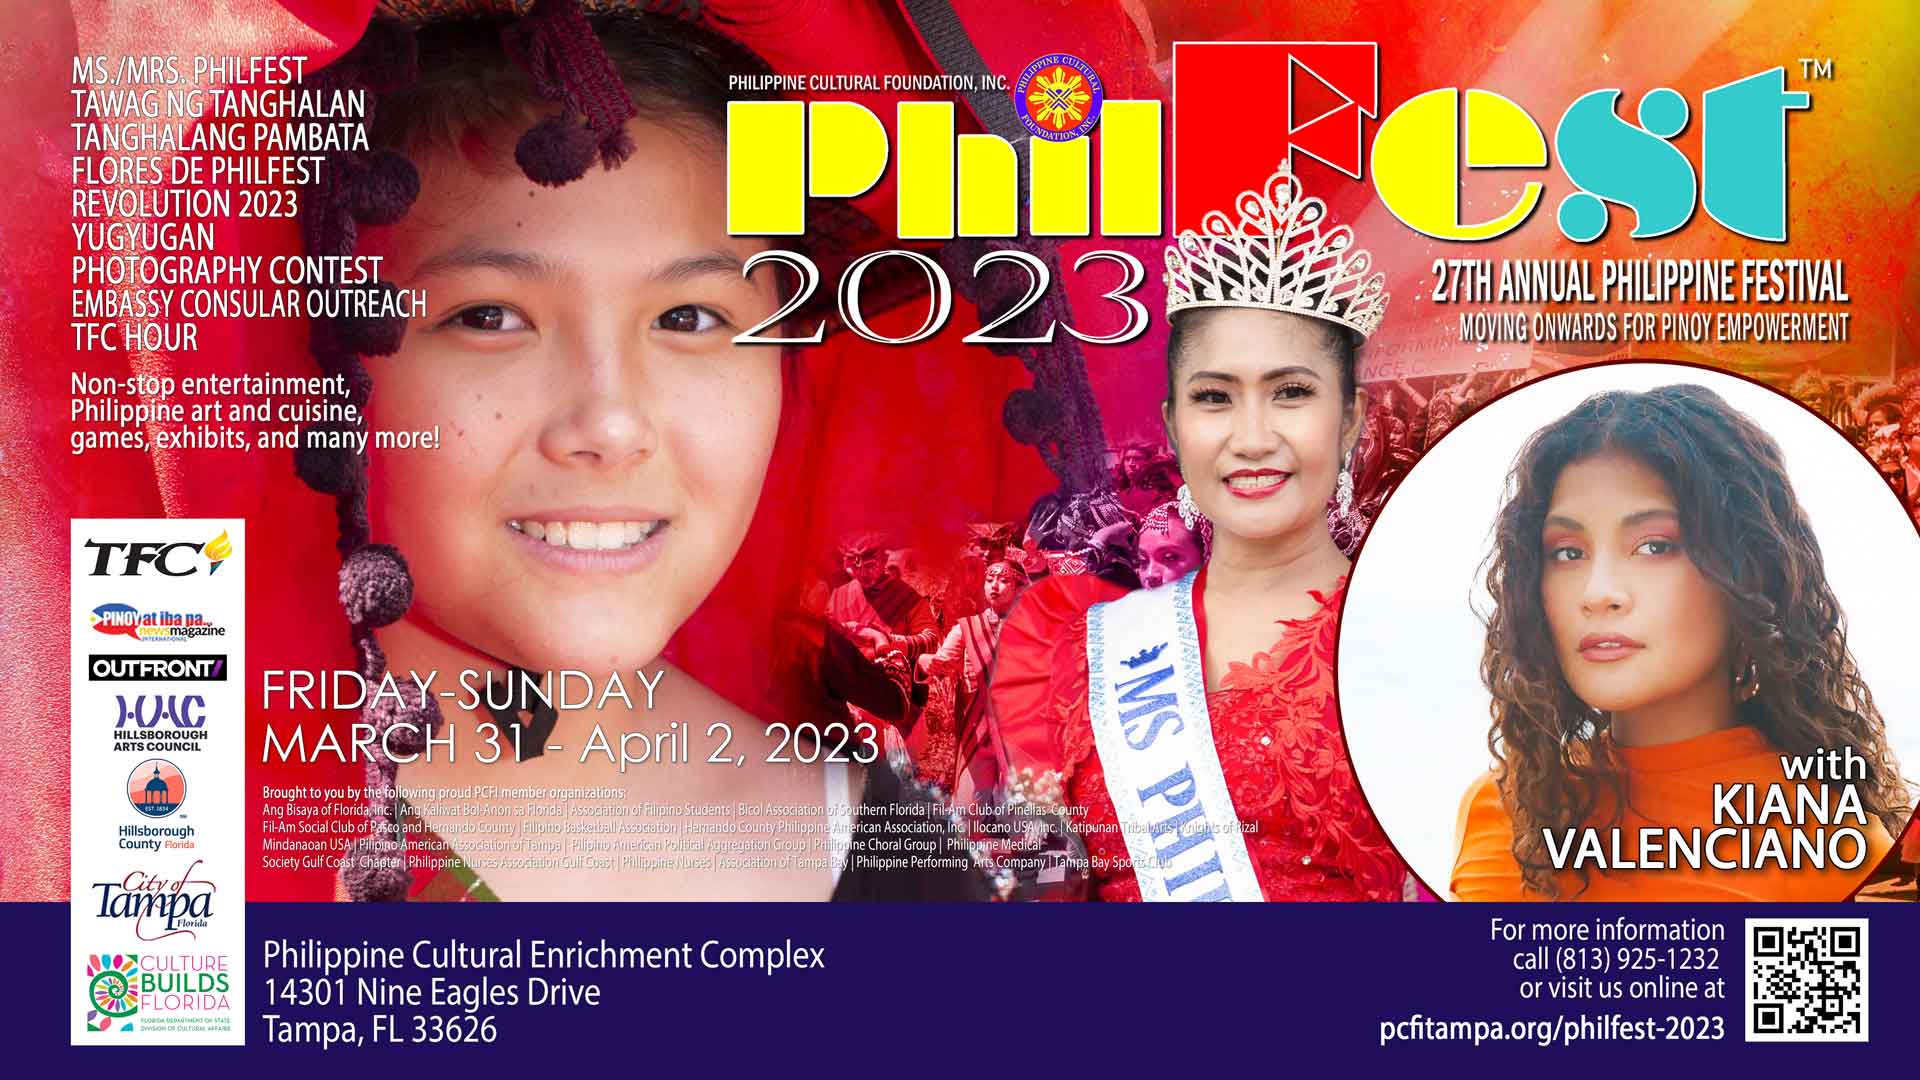 PhilFest 2023 Archives Philippine Cultural Foundation, Inc.